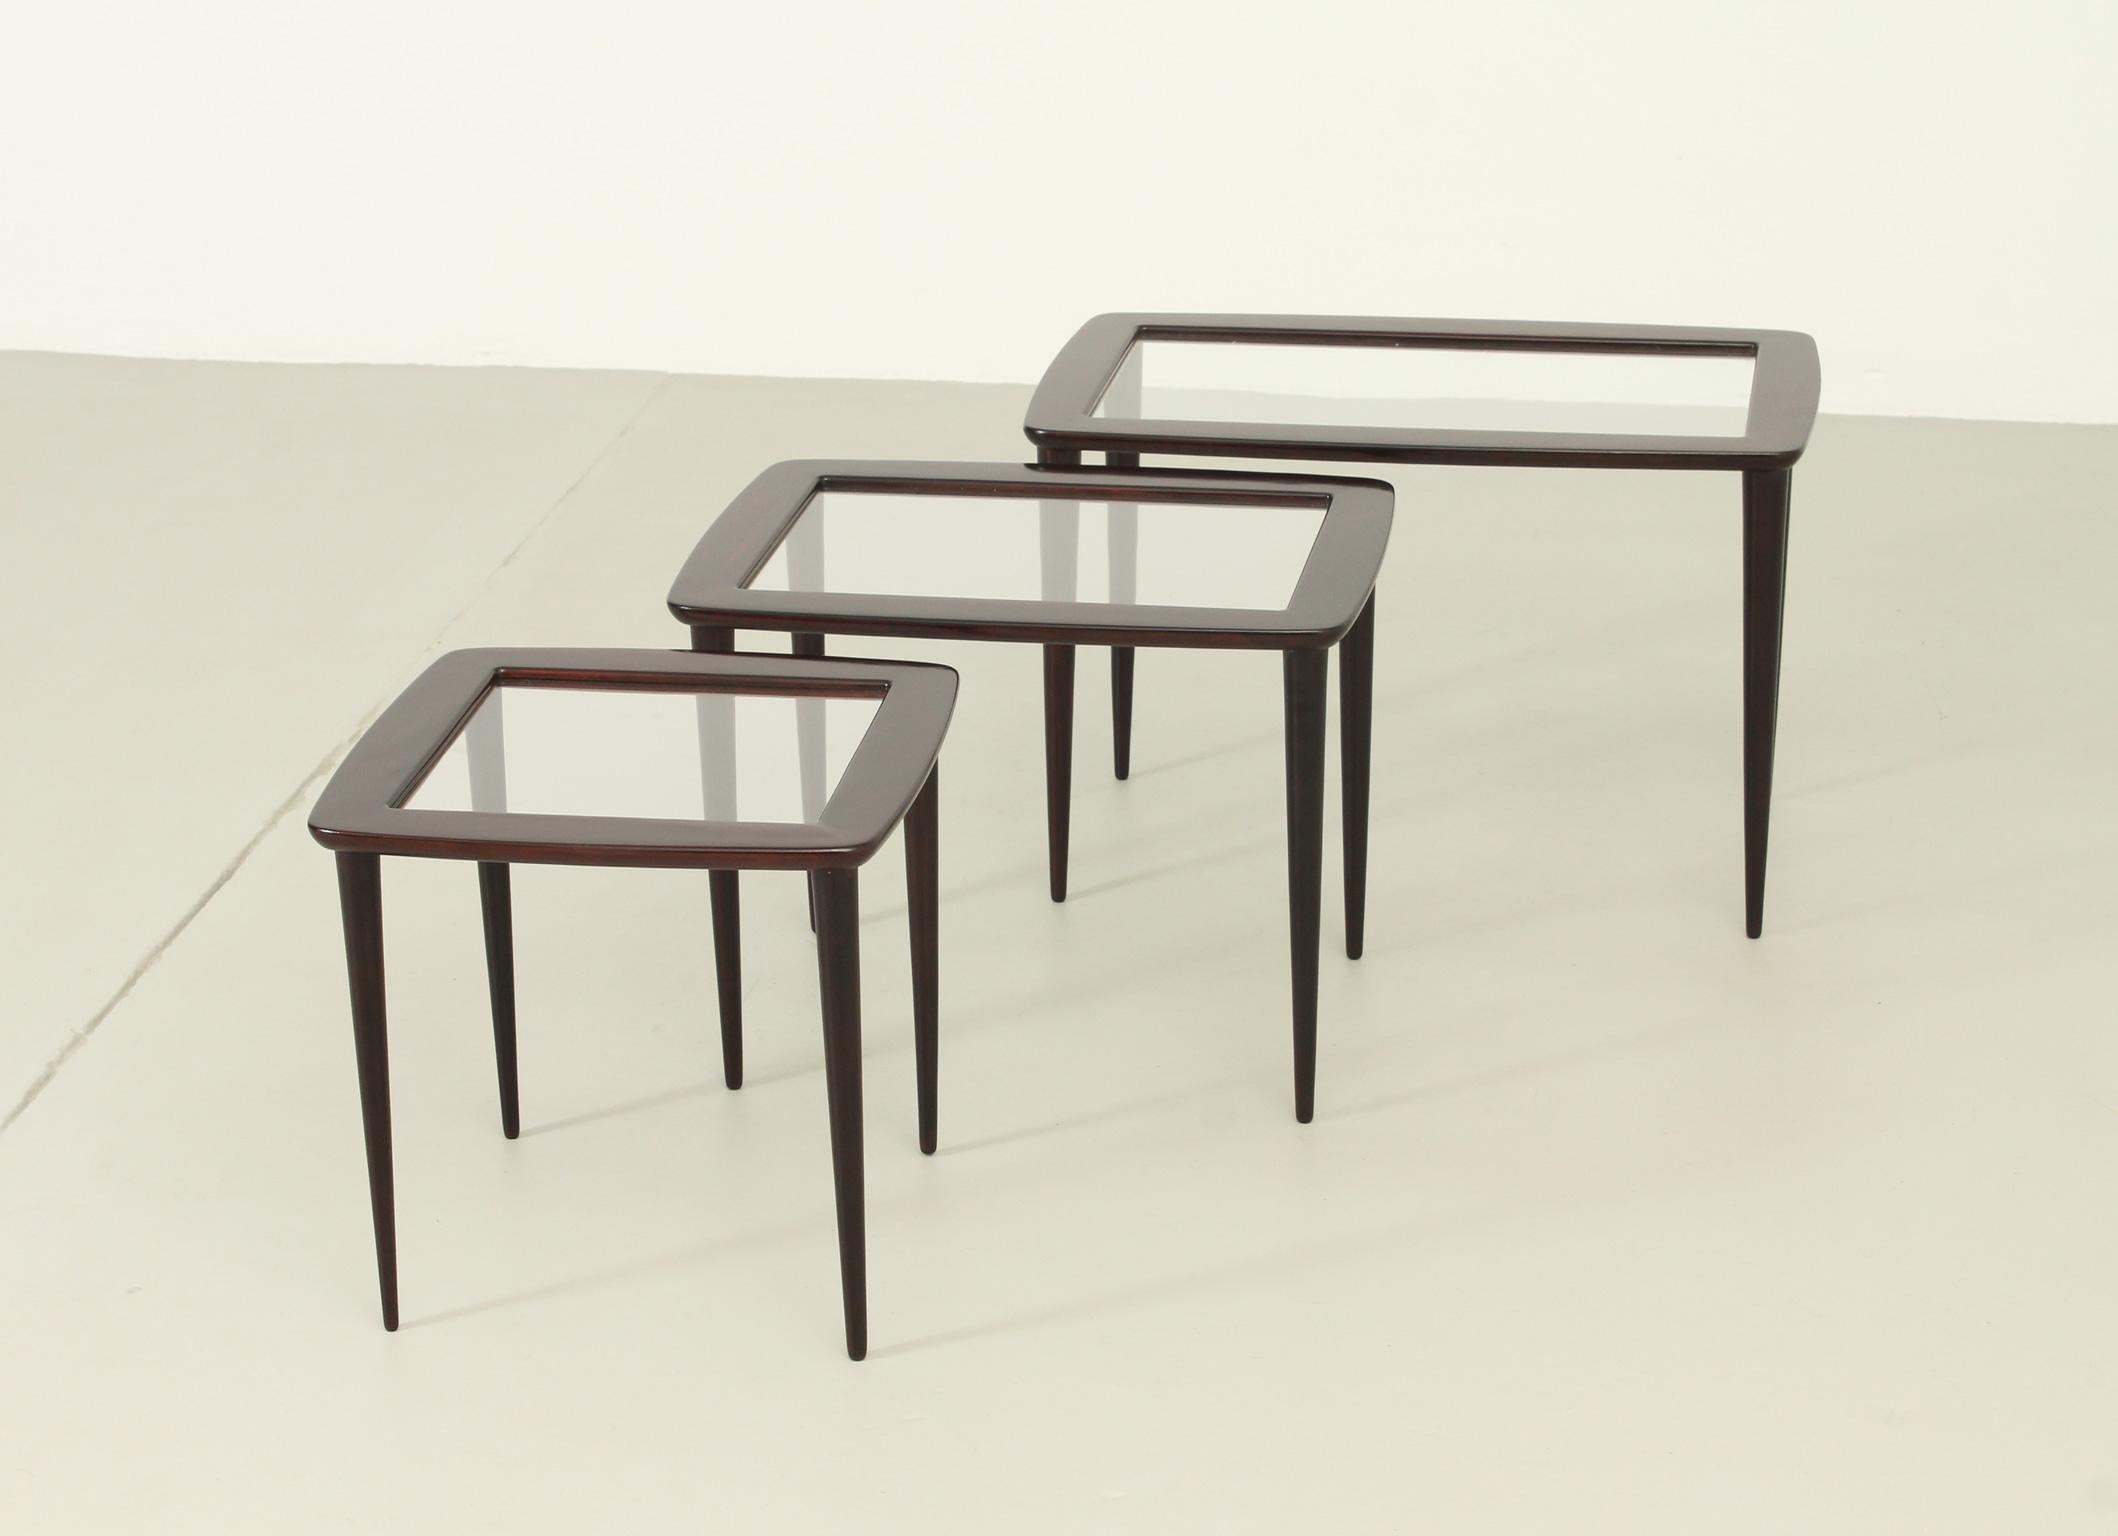 Set of Nesting Tables by Ico Parisi for De Baggis, 1955 For Sale 2